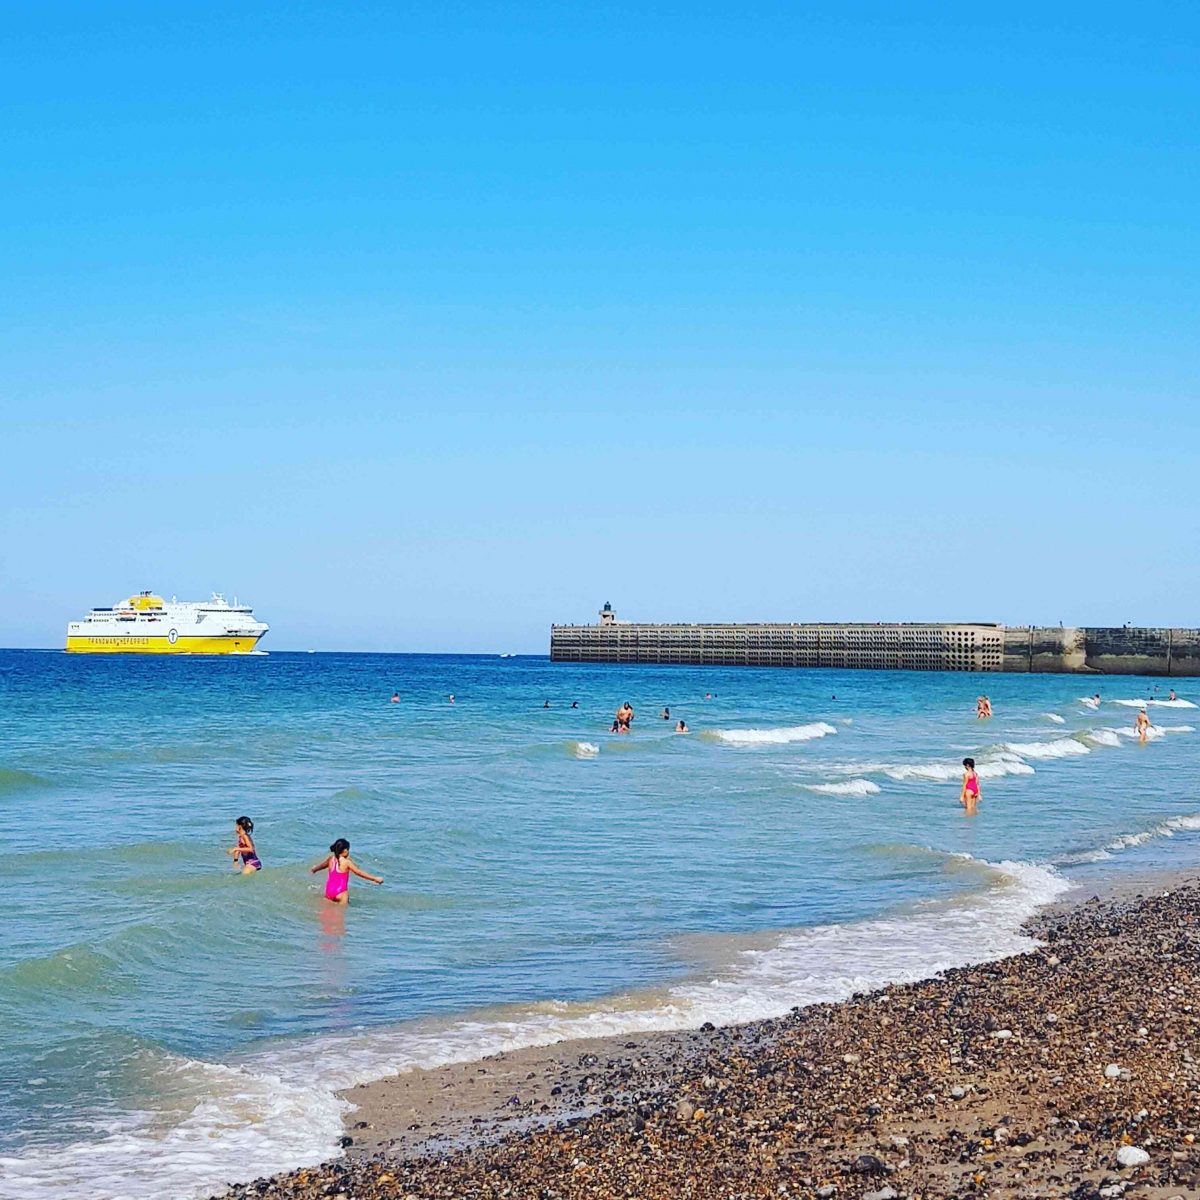 The ferry on the beach of Dieppe